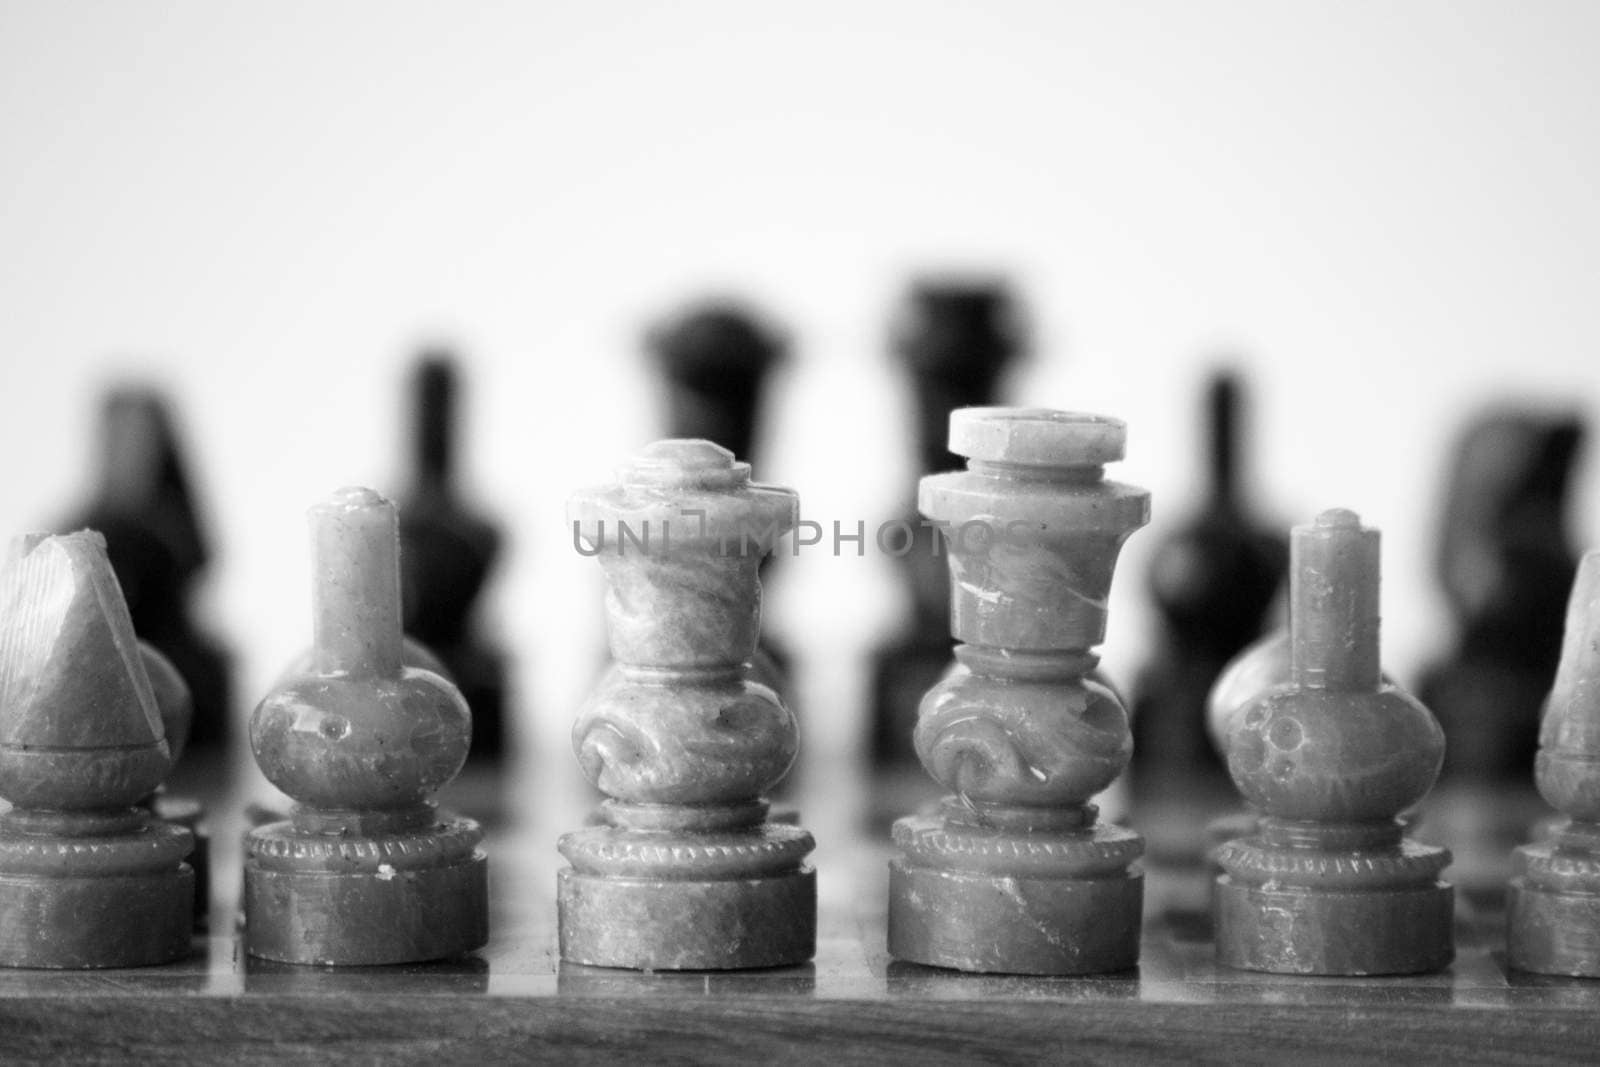 Chess is an strategy and intelligence board game originated in India that is played between two people on a chessboard